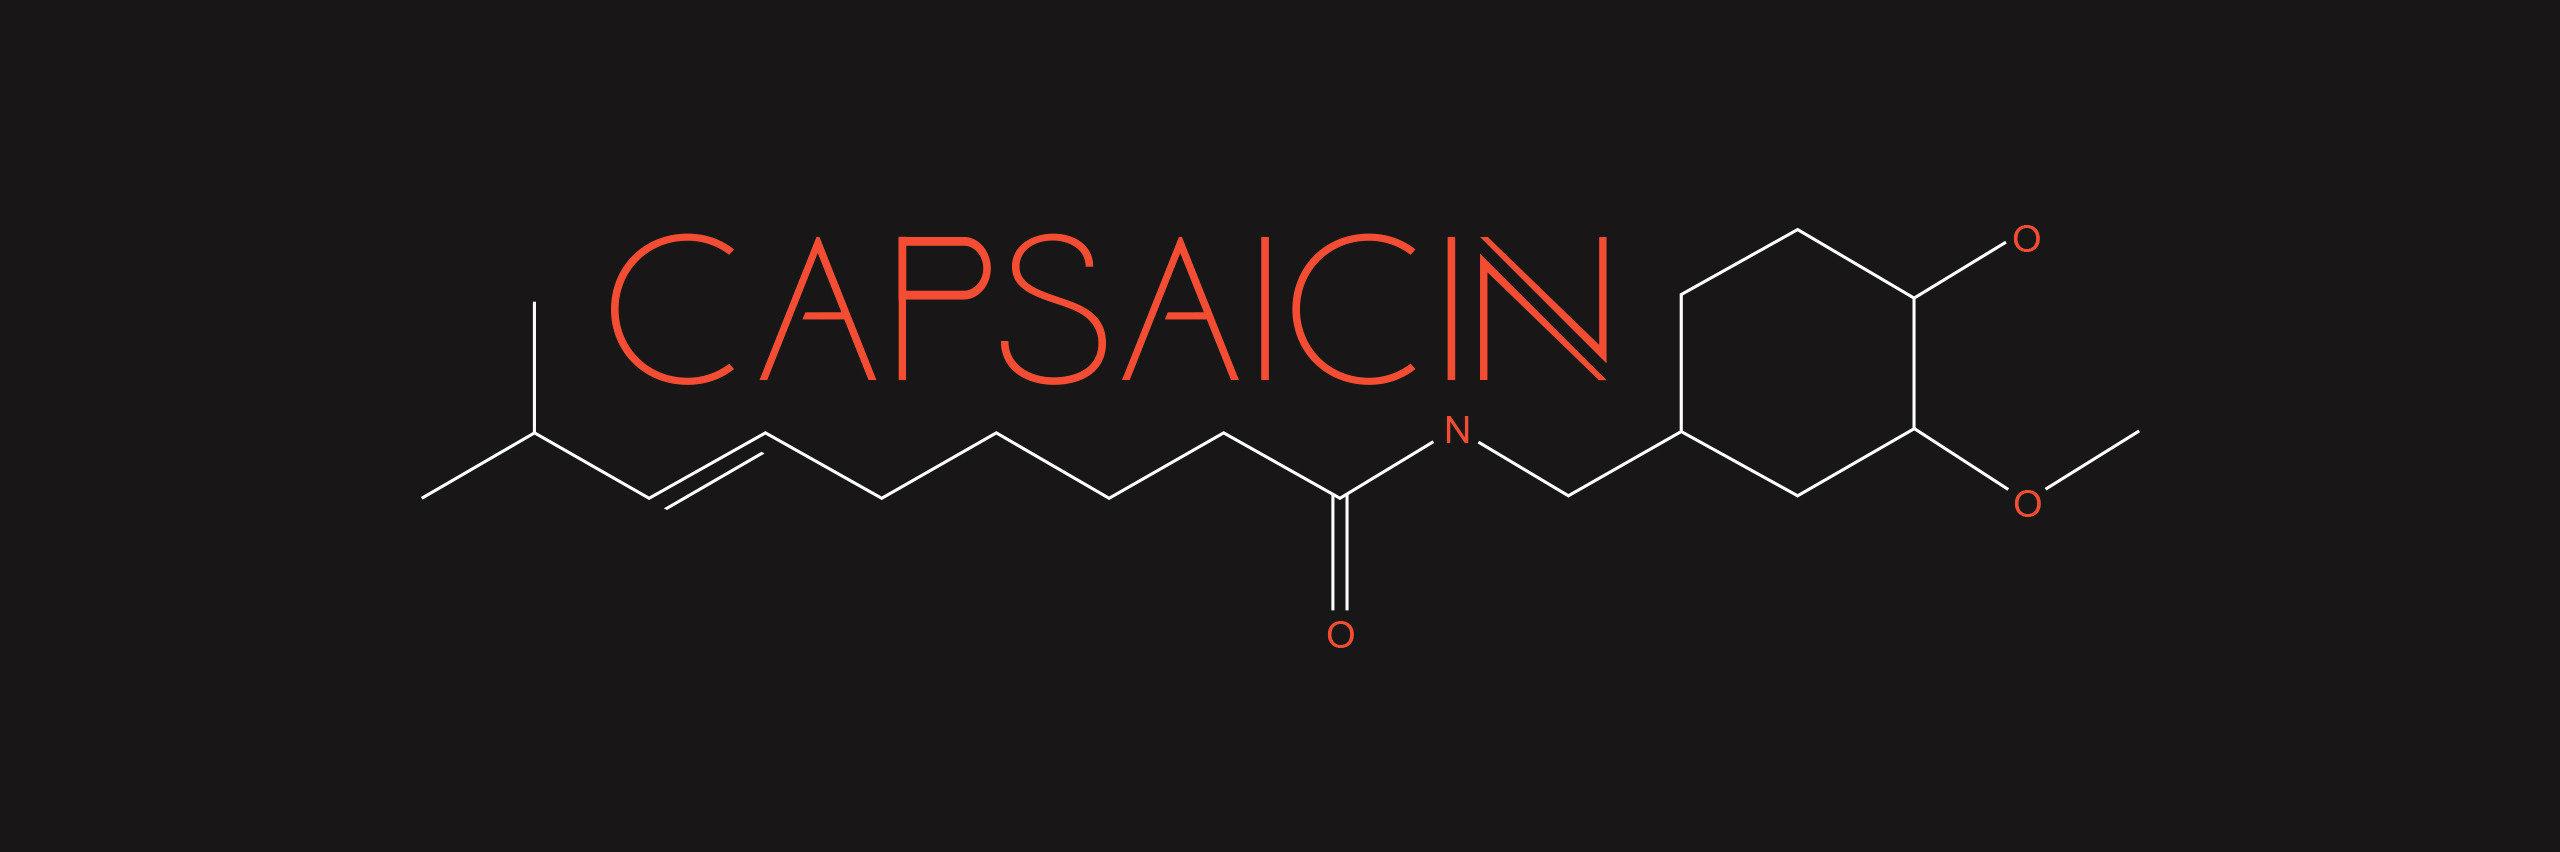 Capsaicin brought to you by AMD Radeon™